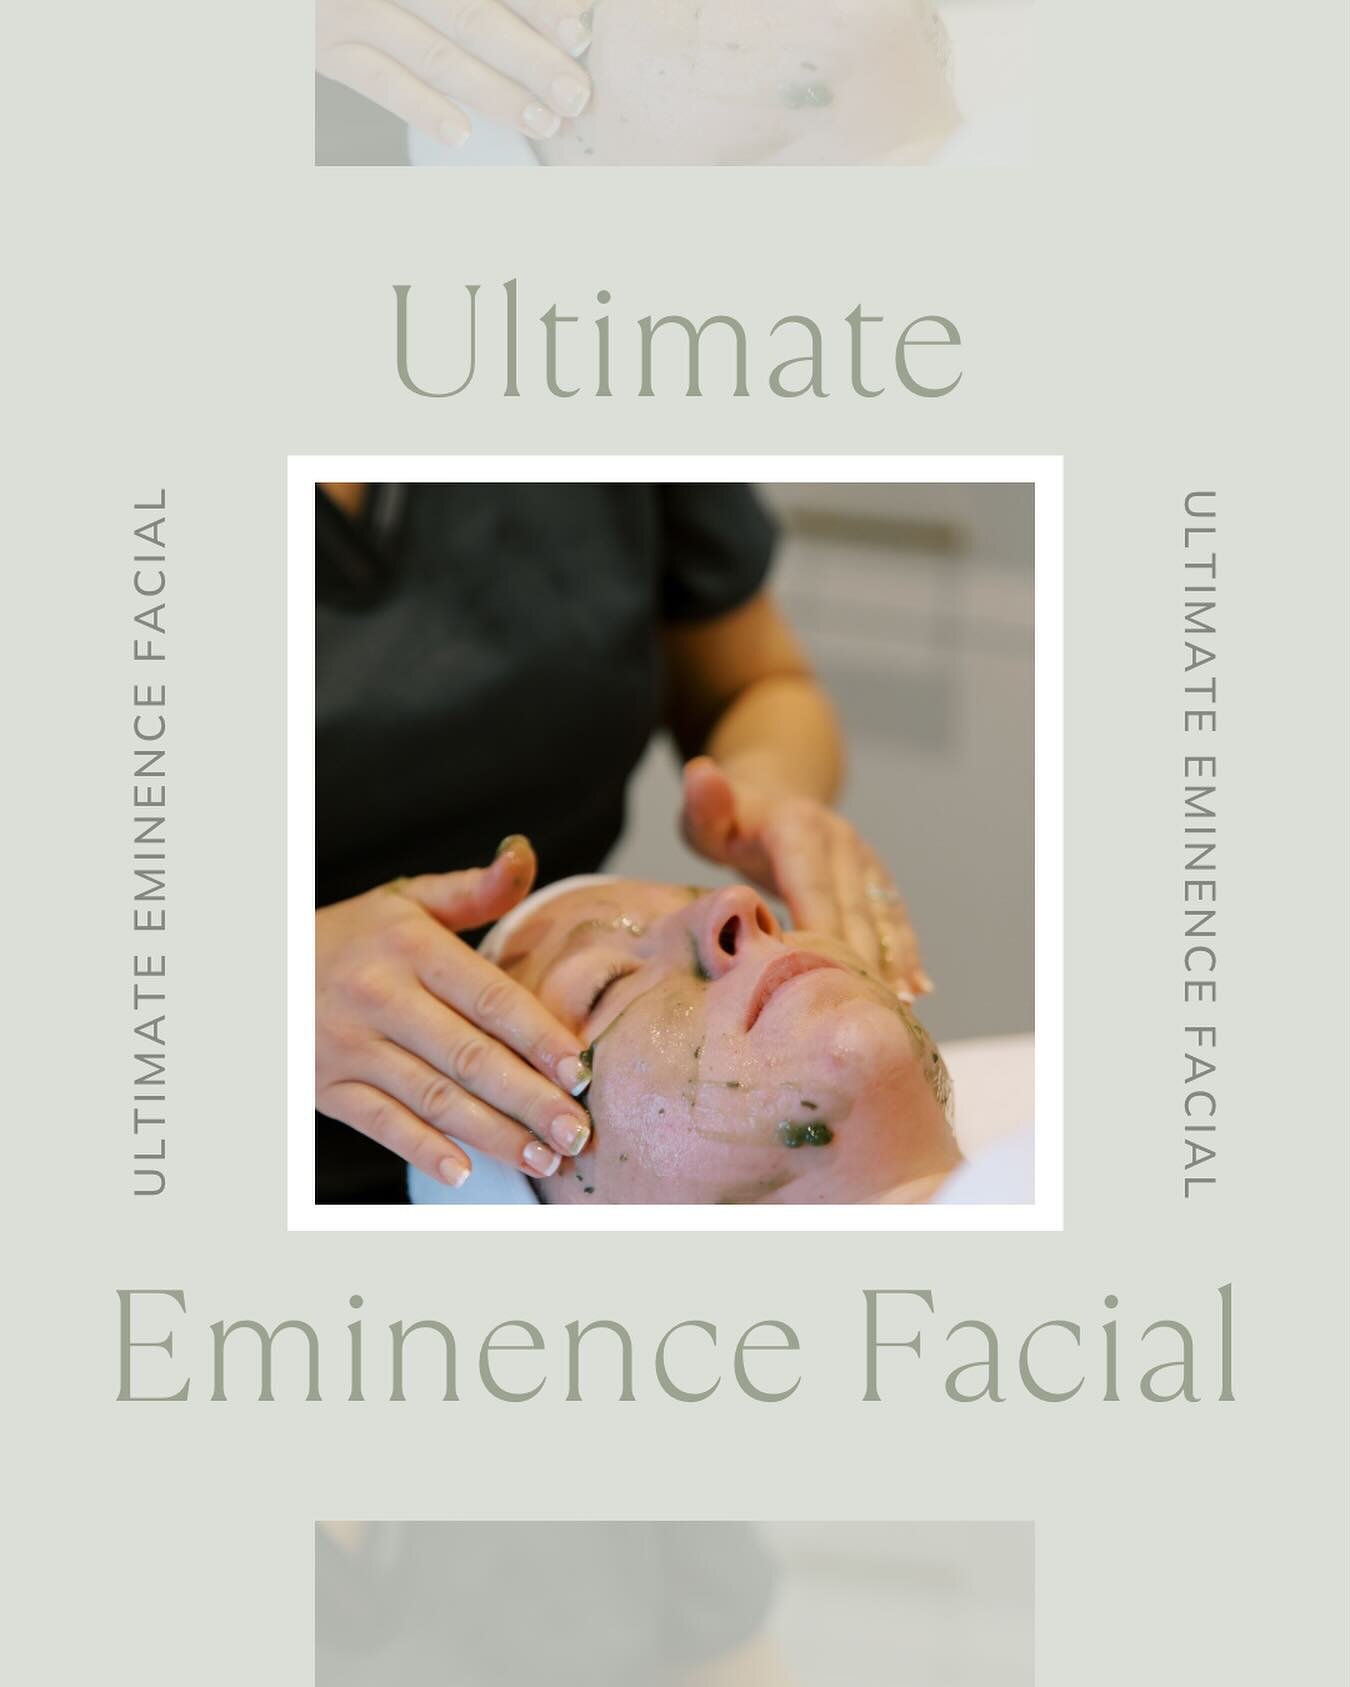 ✨NEW✨Ultimate Eminence Facial!

More than just a facial, the Ultimate is a total skin transformation.

Watch fine lines disappear with our invigorating face &amp; neck lifting massage plus three targeted facial enhancements included! An Eminence orga